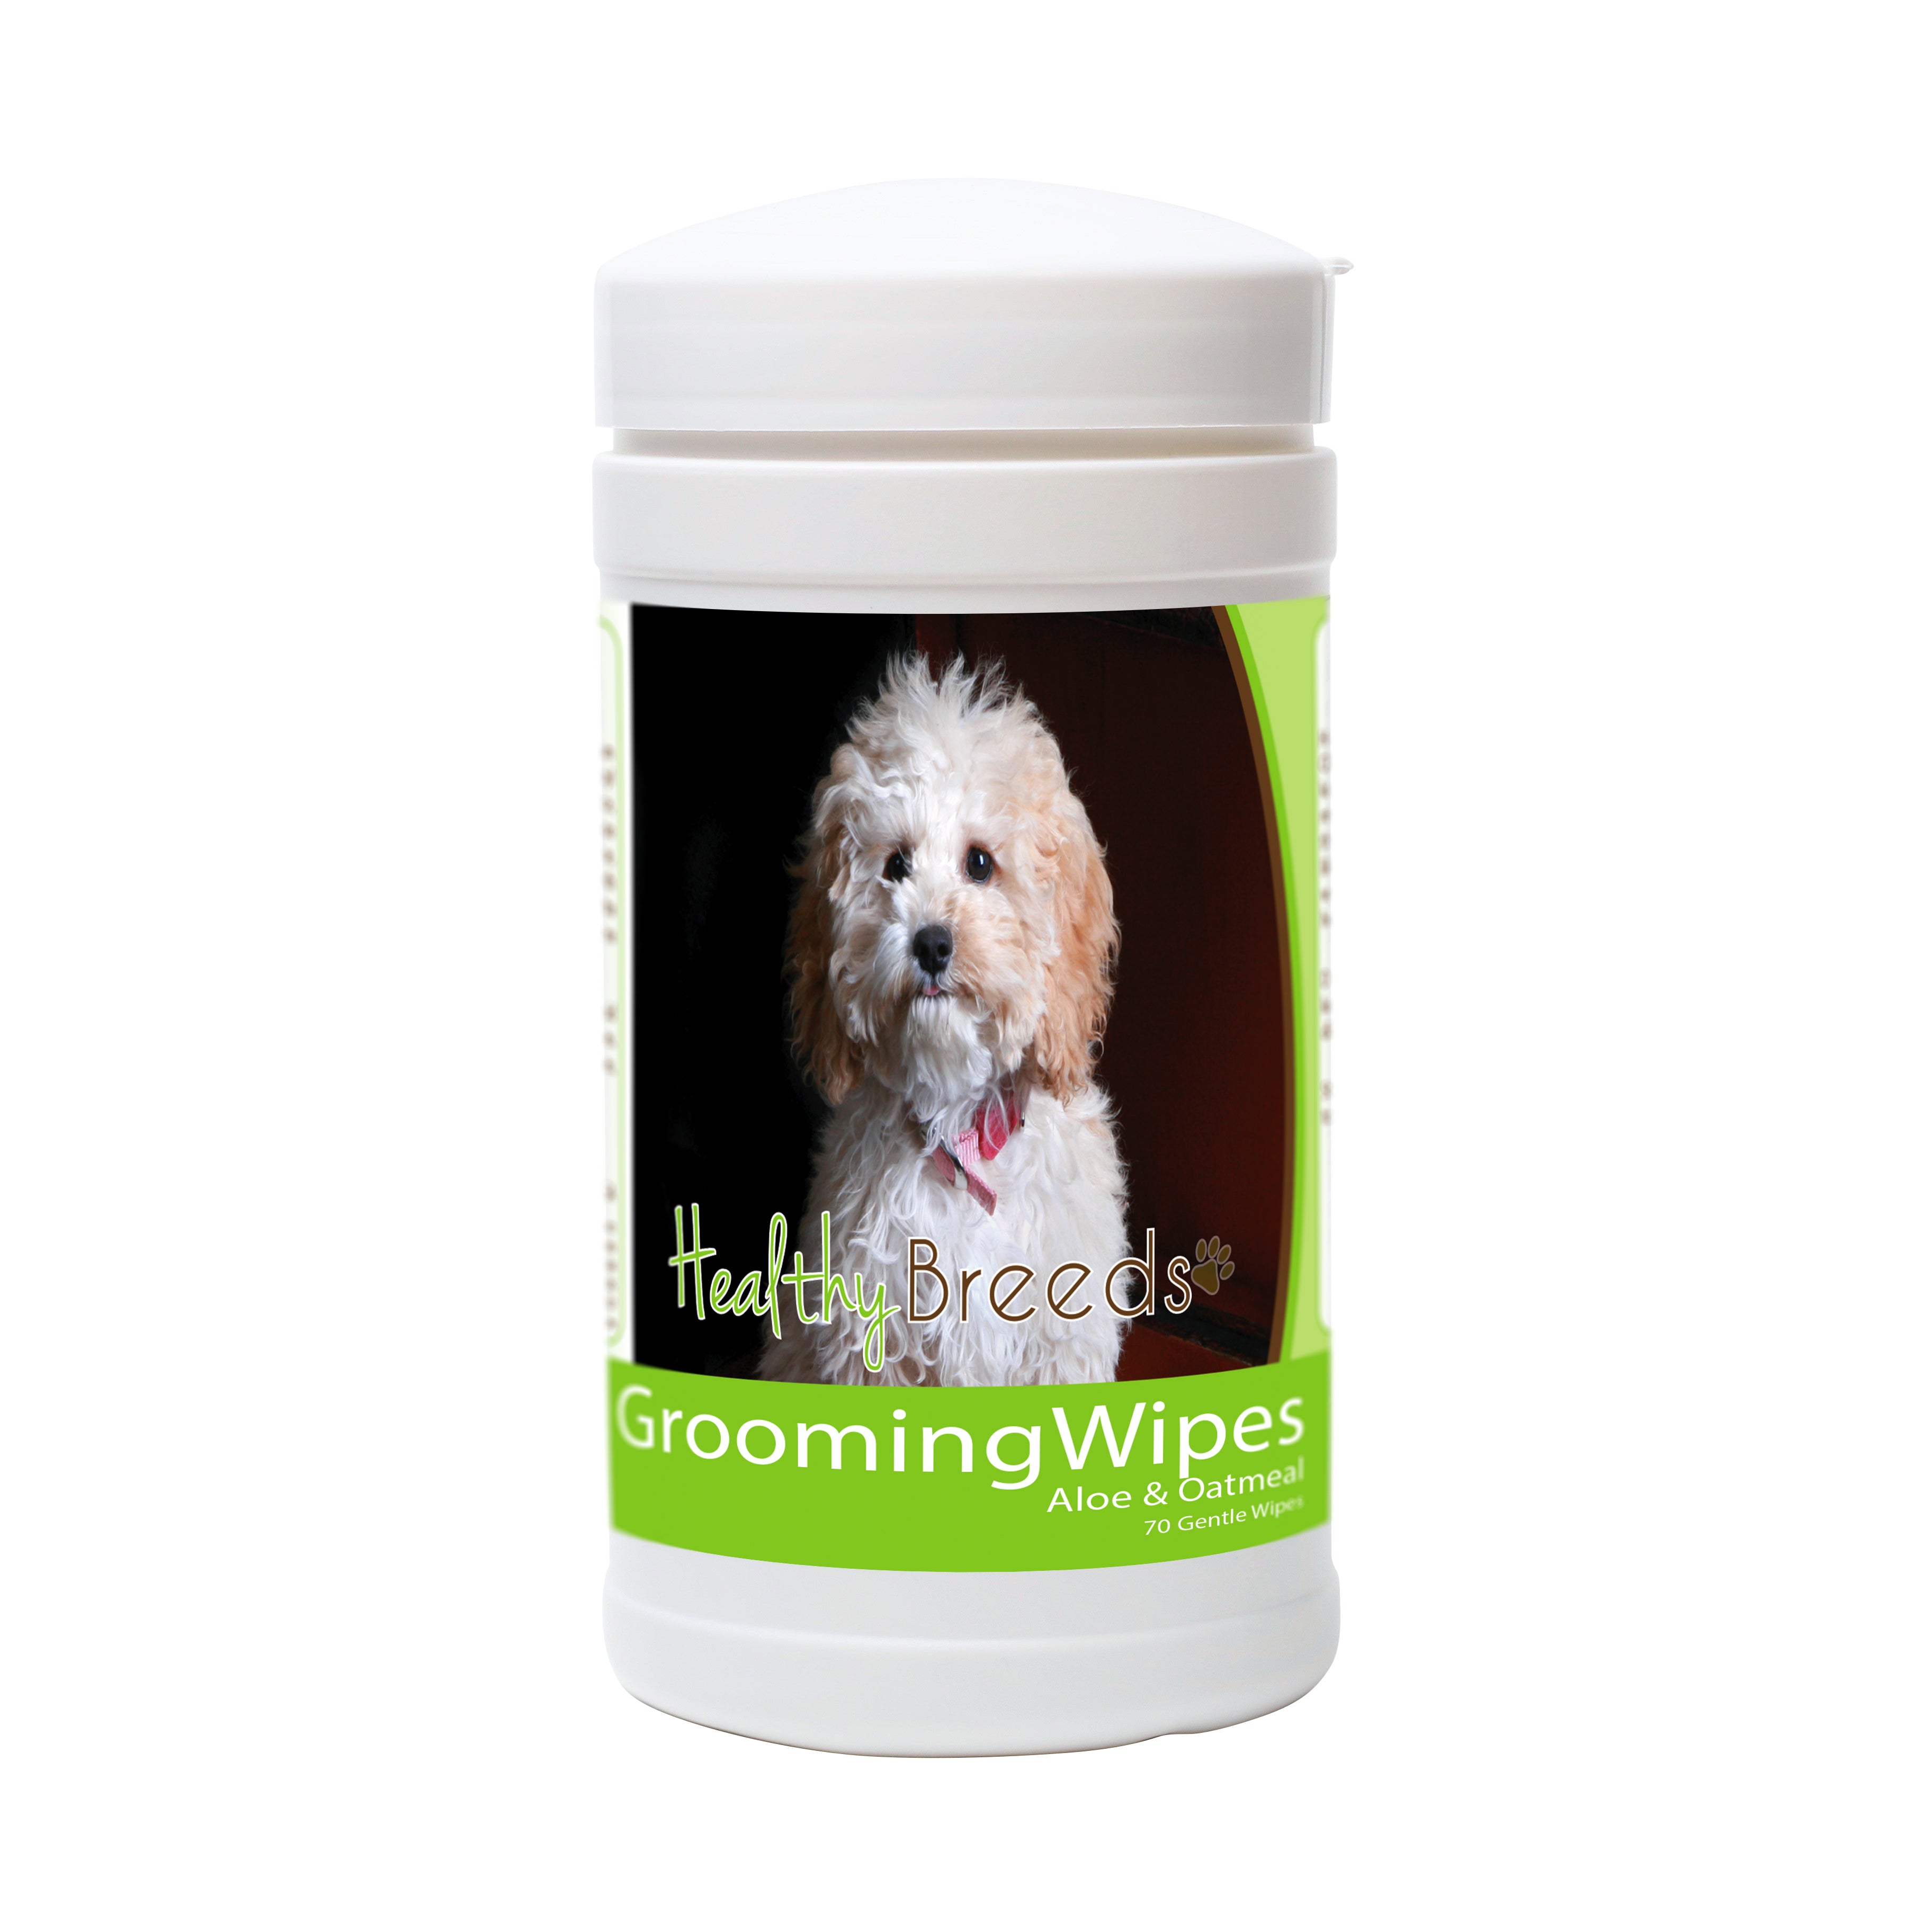 Cockapoo Grooming Wipes 70 Count